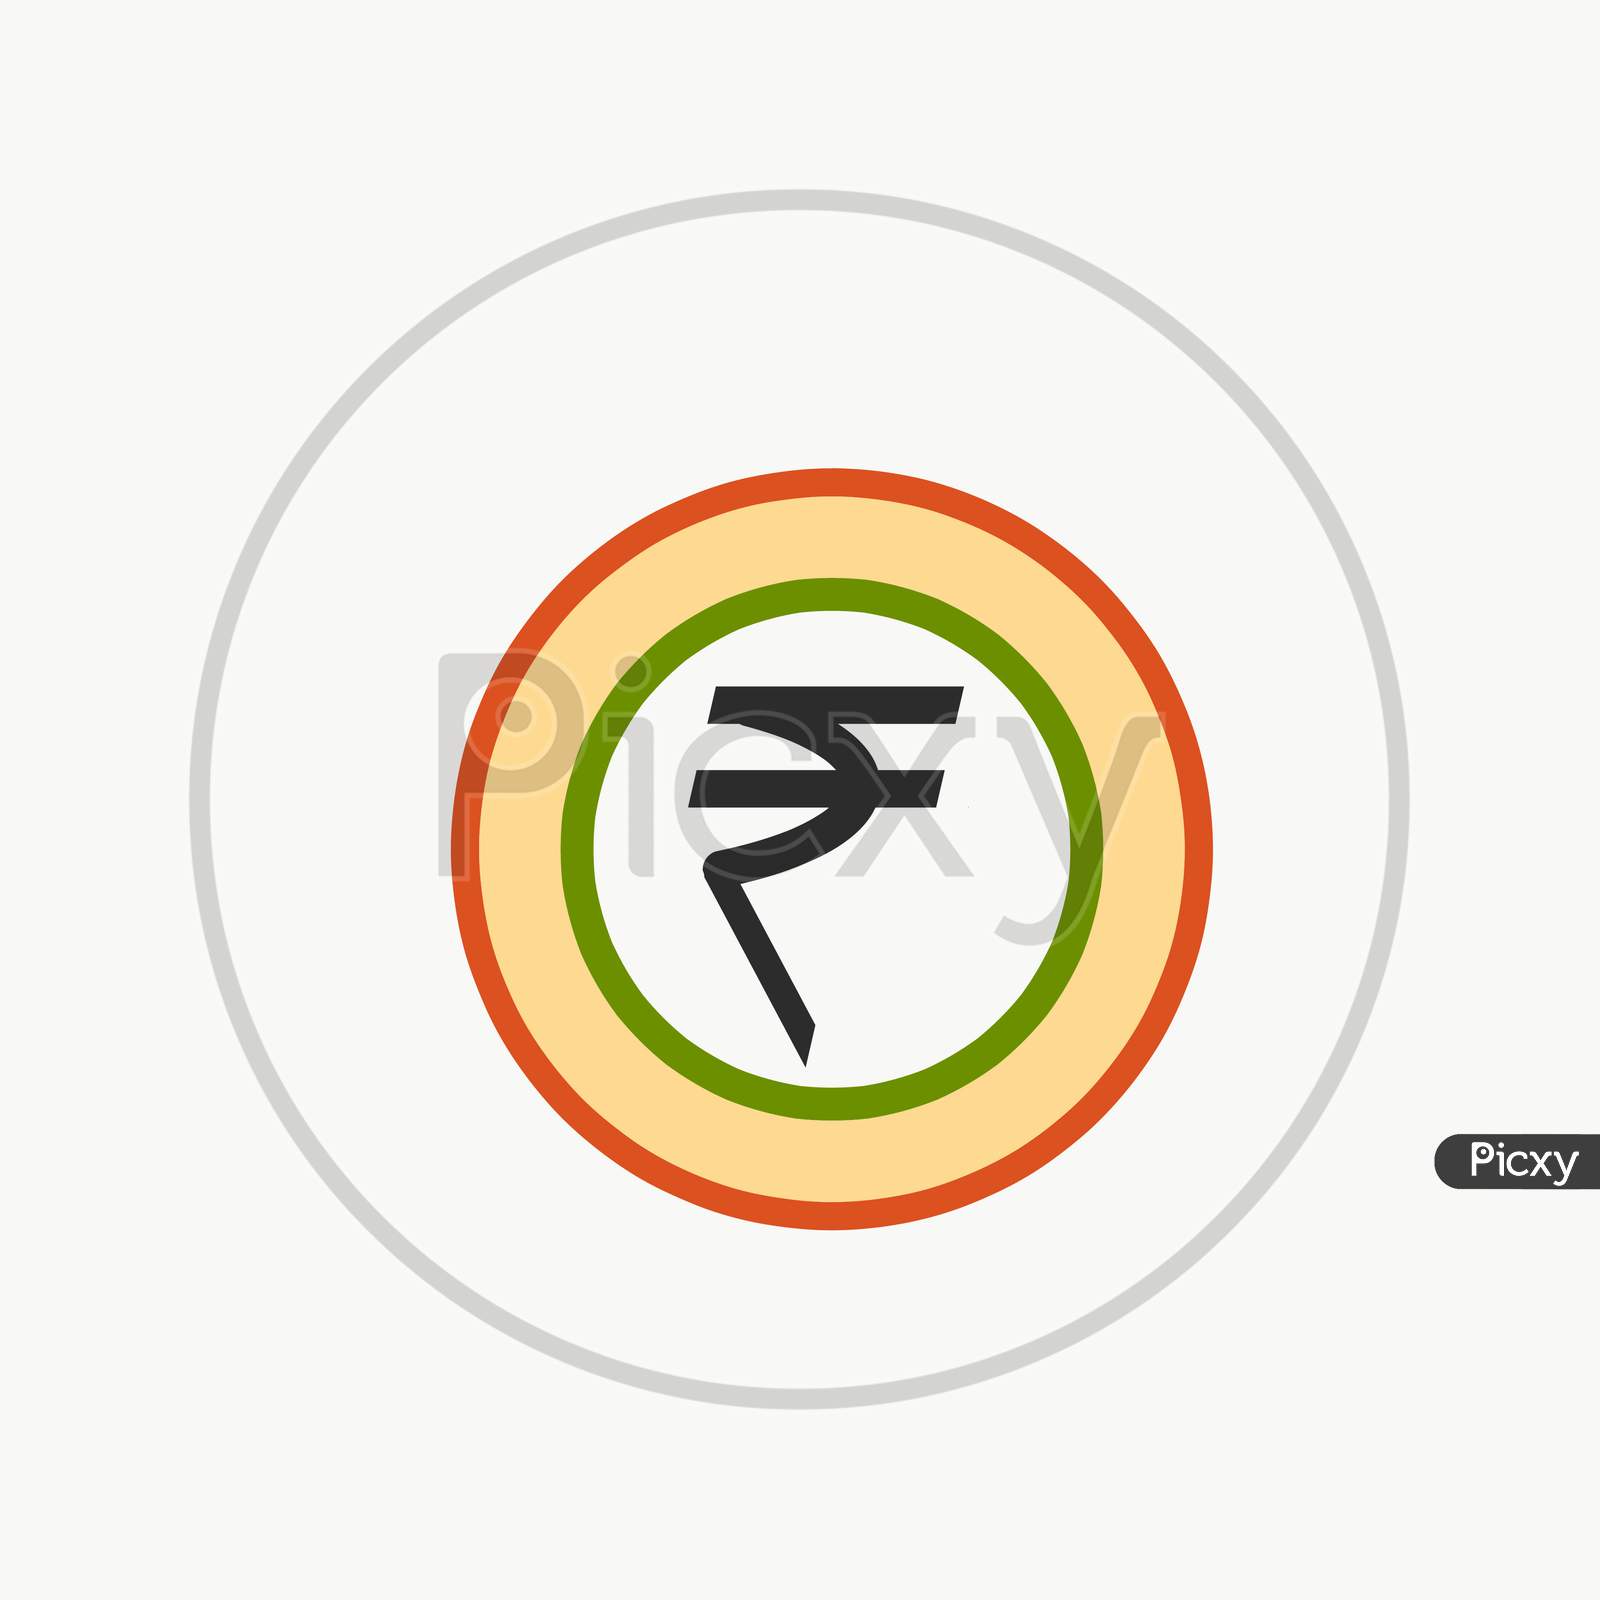 Rupee Sign In Indian Color In Circle